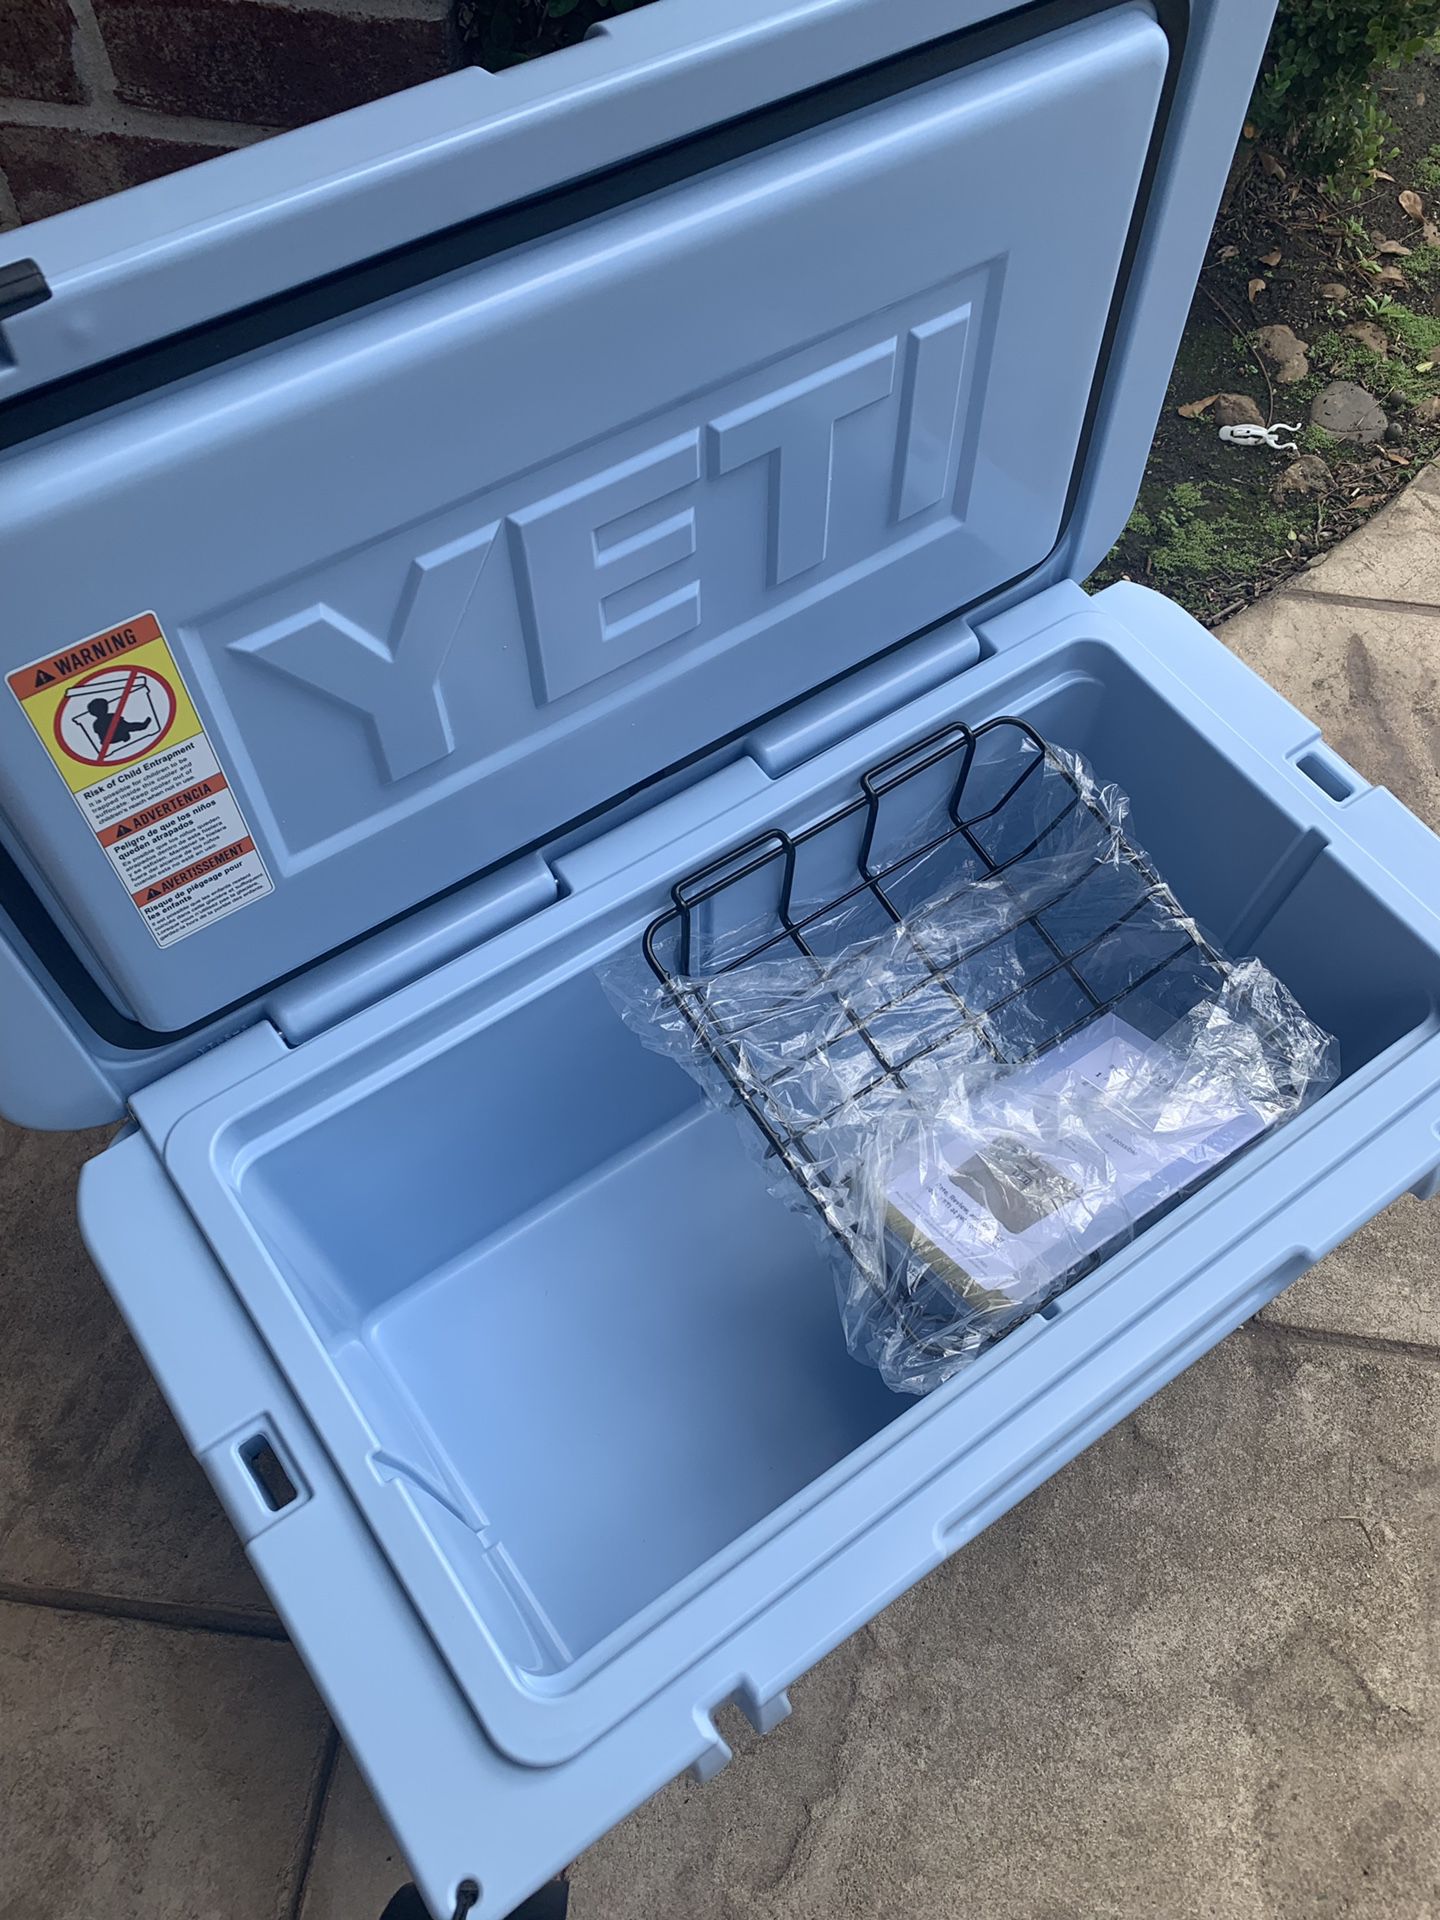 YETI Tundra 65 Cooler in Charcoal – Occasionally Yours